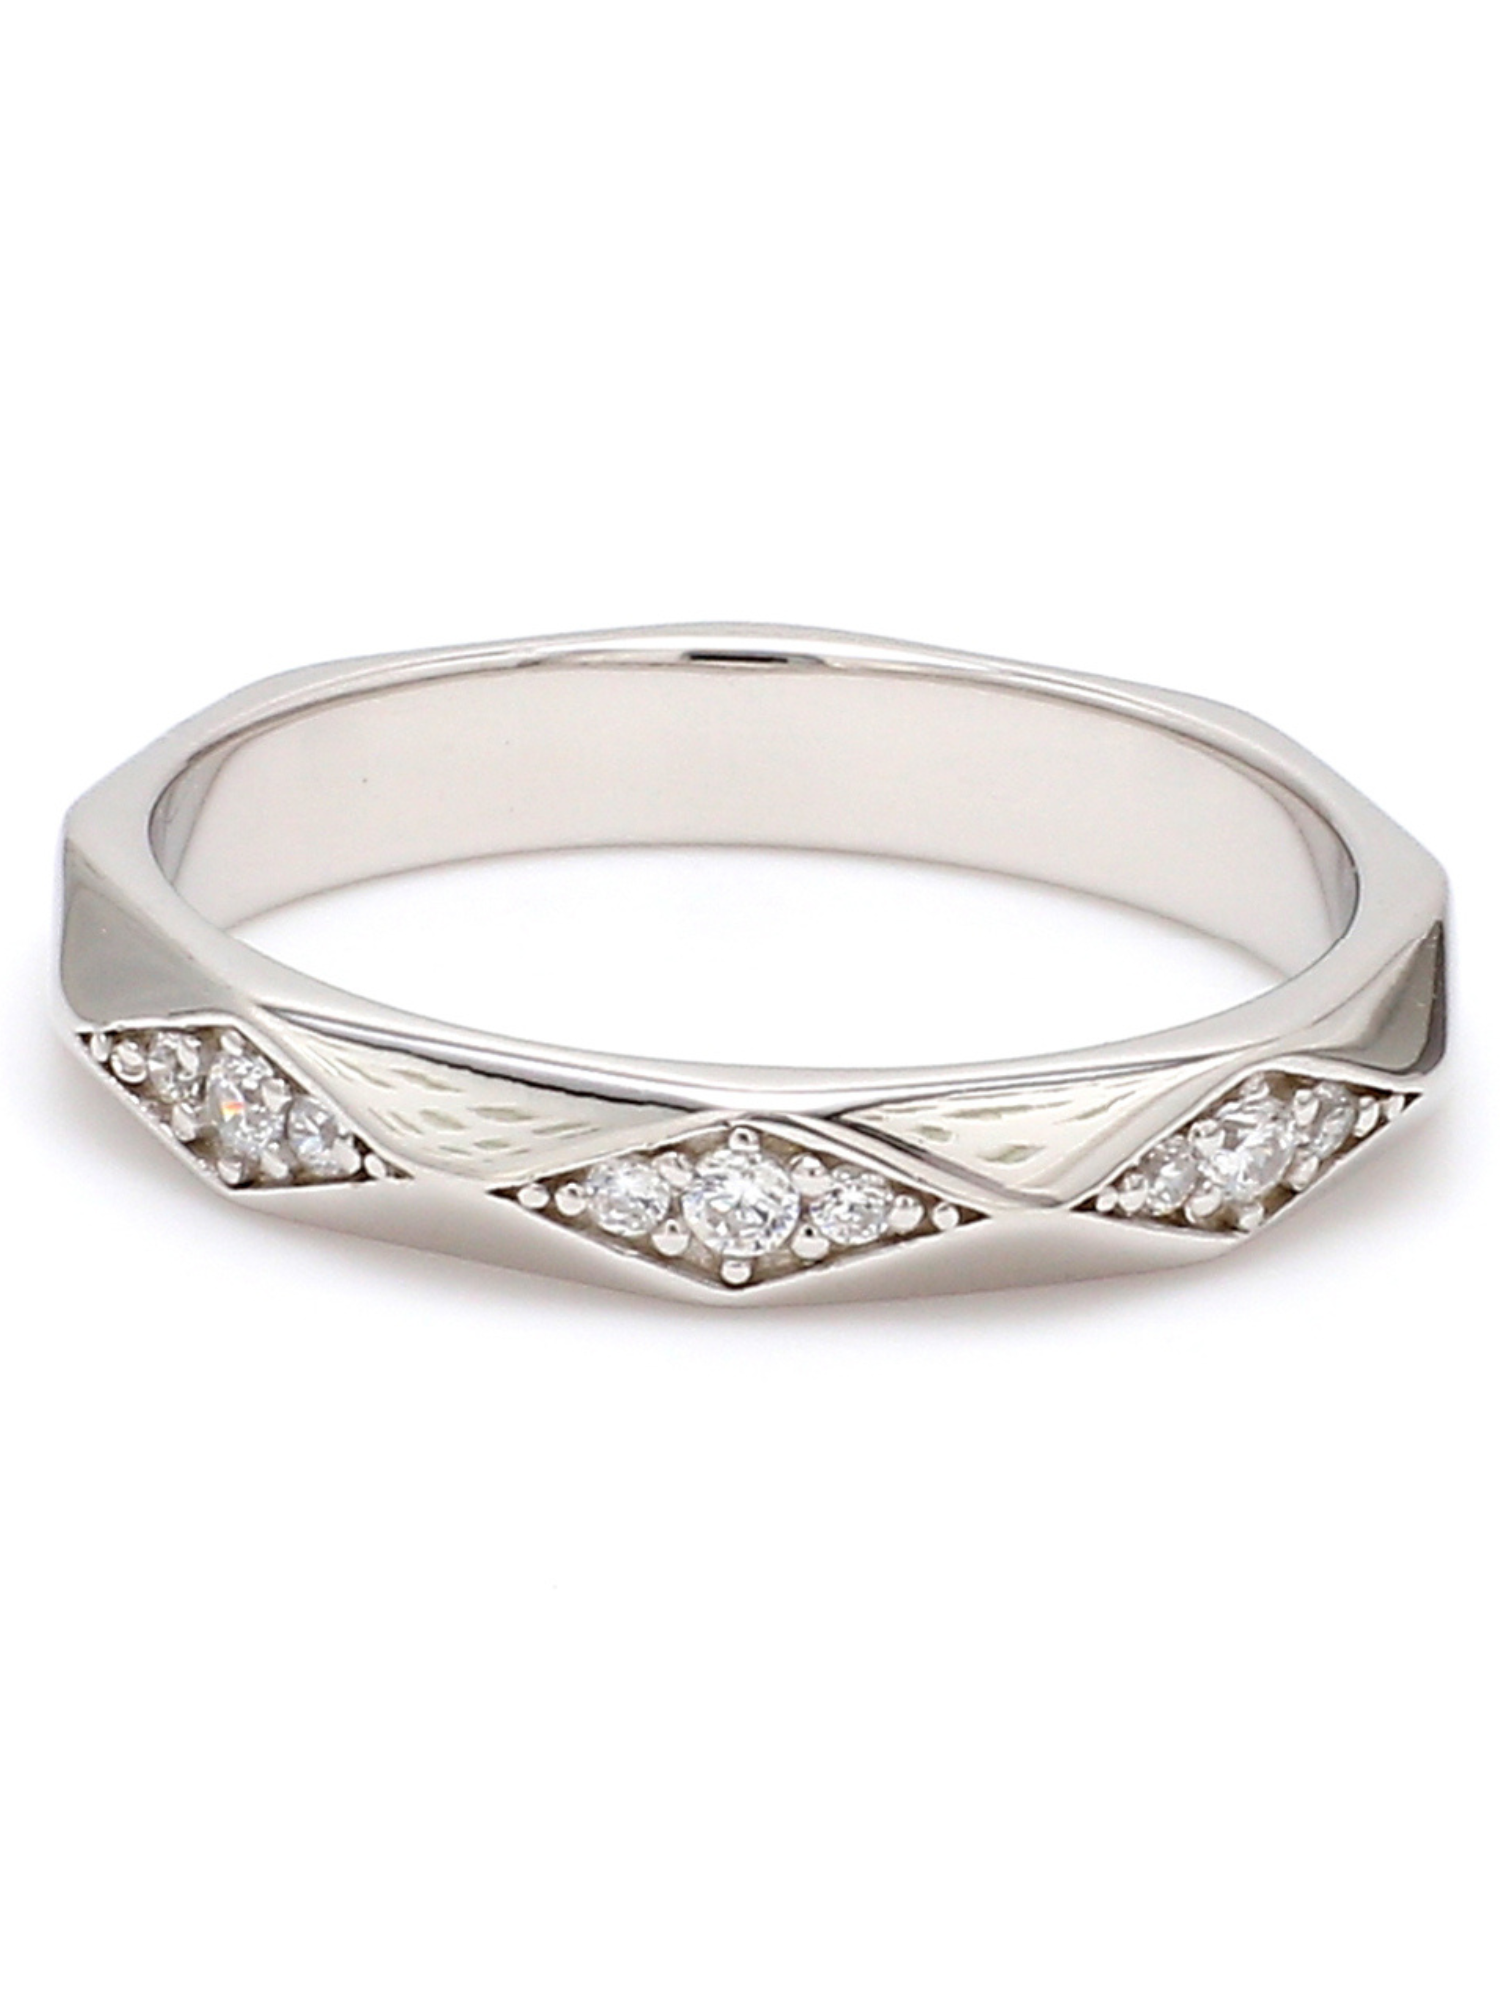 925 STERLING SILVER AMERICAN DIAMOND BAND RING FOR WOMENS